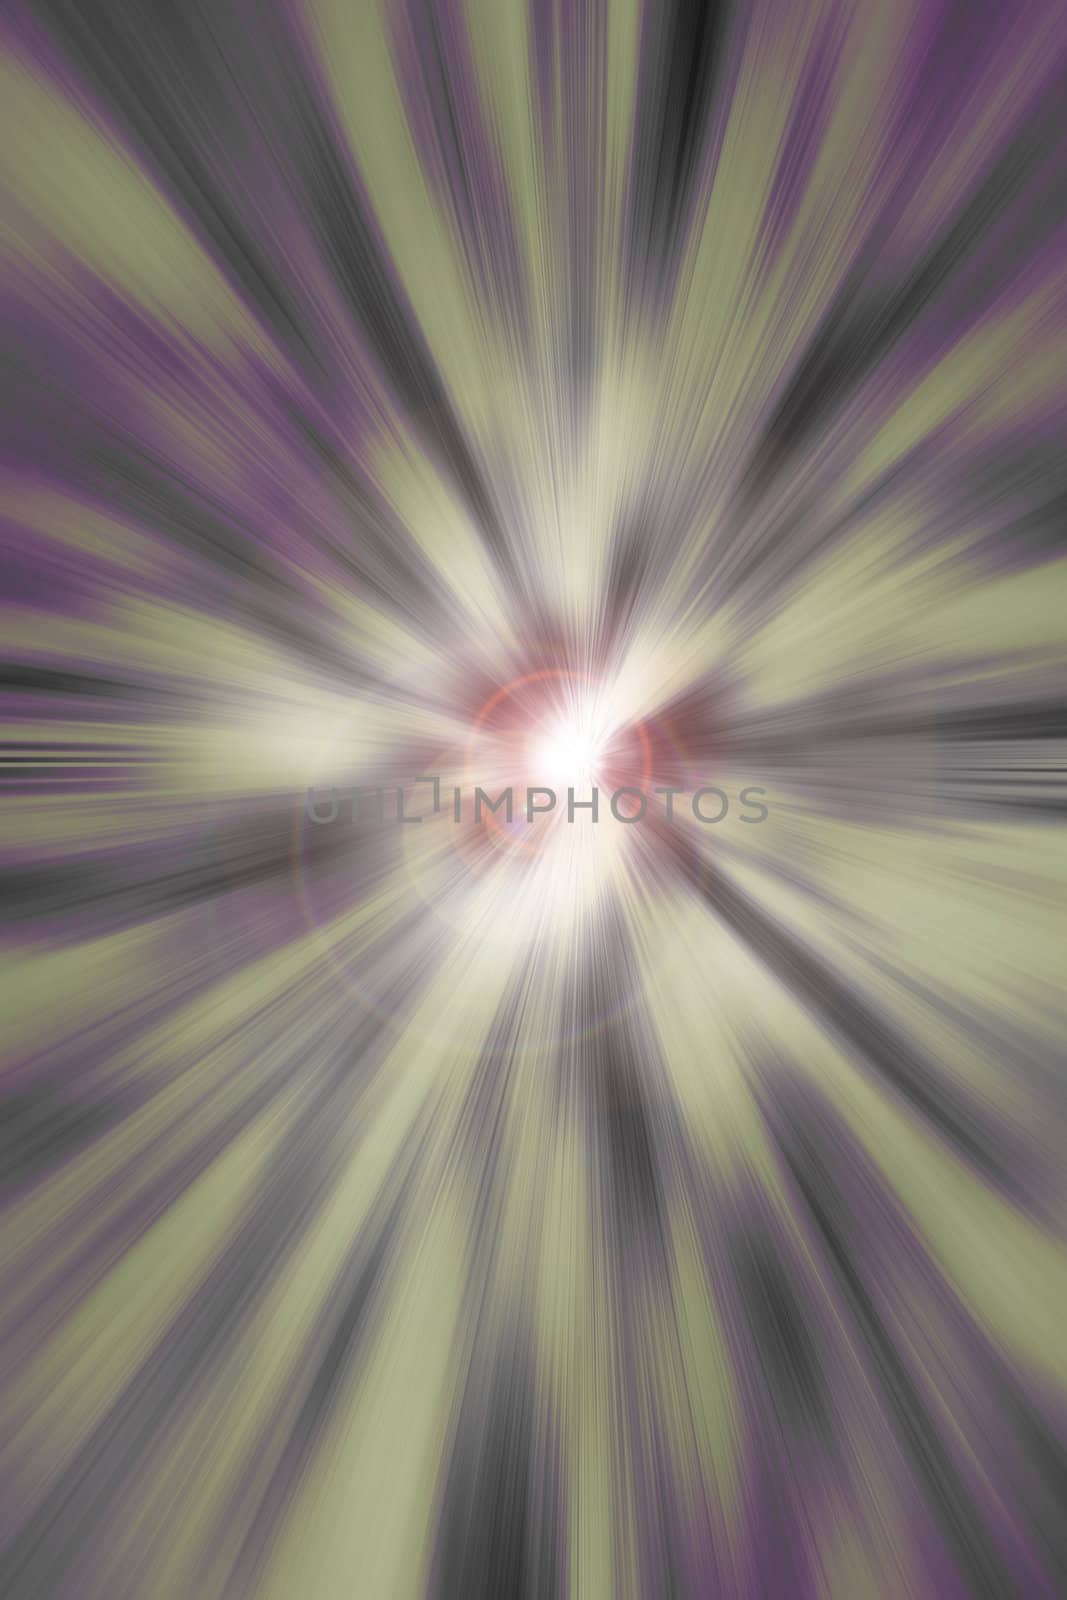   A star burst or lens flare over a black background. It also looks like an abstract illustration of the sun.
